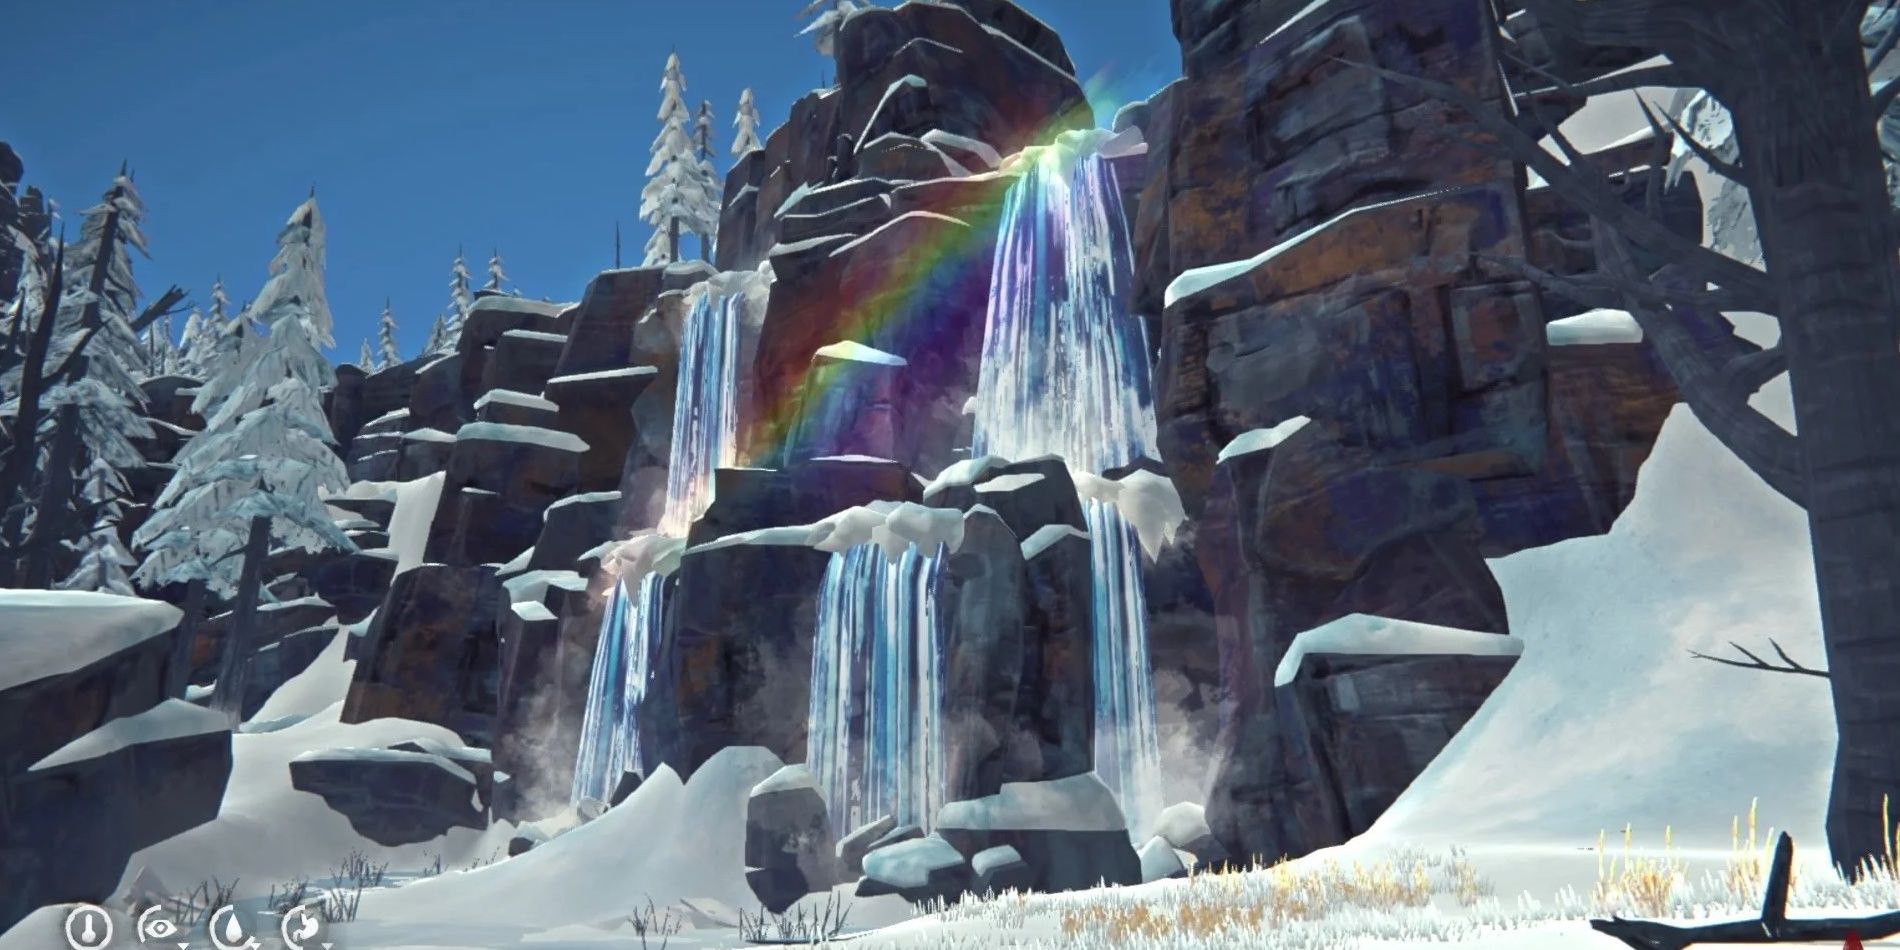 The twin sister of the Long Dark Hashed River Valley drops a double rainbow